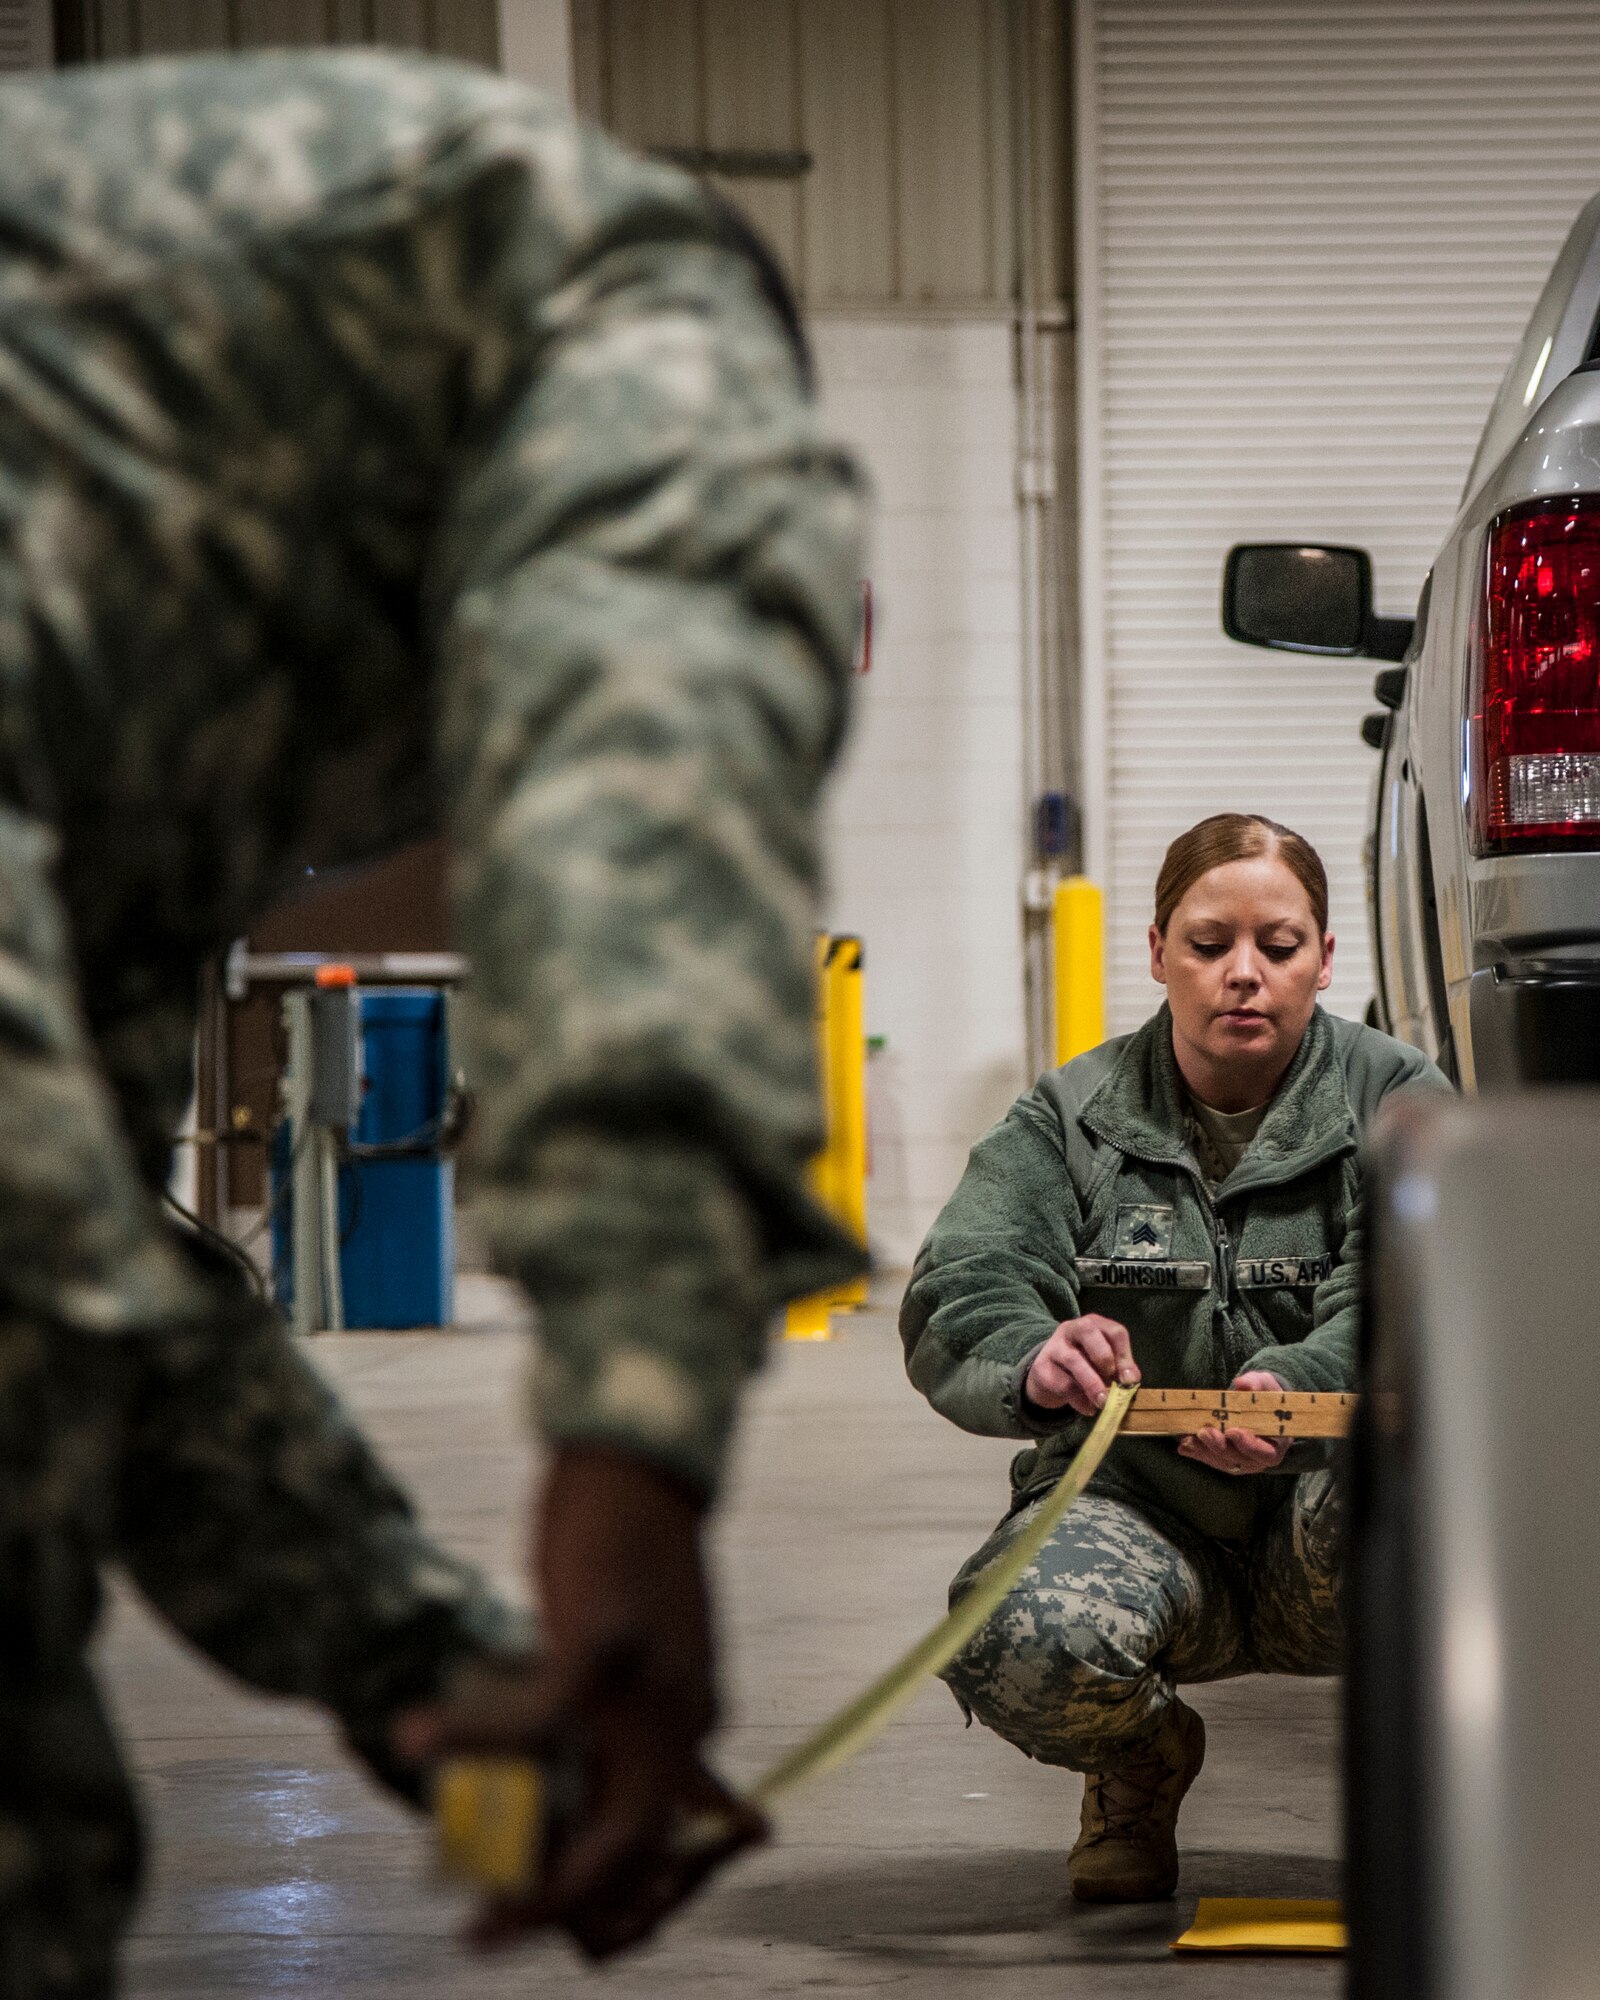 Army Sgt. Amber Johnson, Federal Emergency Management Agency, measures the length of a trailer during a joint exercise at Joint Base McGuire-Dix-Lakehurst, N.J., Feb. 12, 2015. Mobility specialists comprised of Army, Air Force and FEMA personnel came together to review policies and practices in the event airlift is needed to support a national emergency or crisis. (U.S. Air Force photo by Staff Sgt. Scott Saldukas/Released)